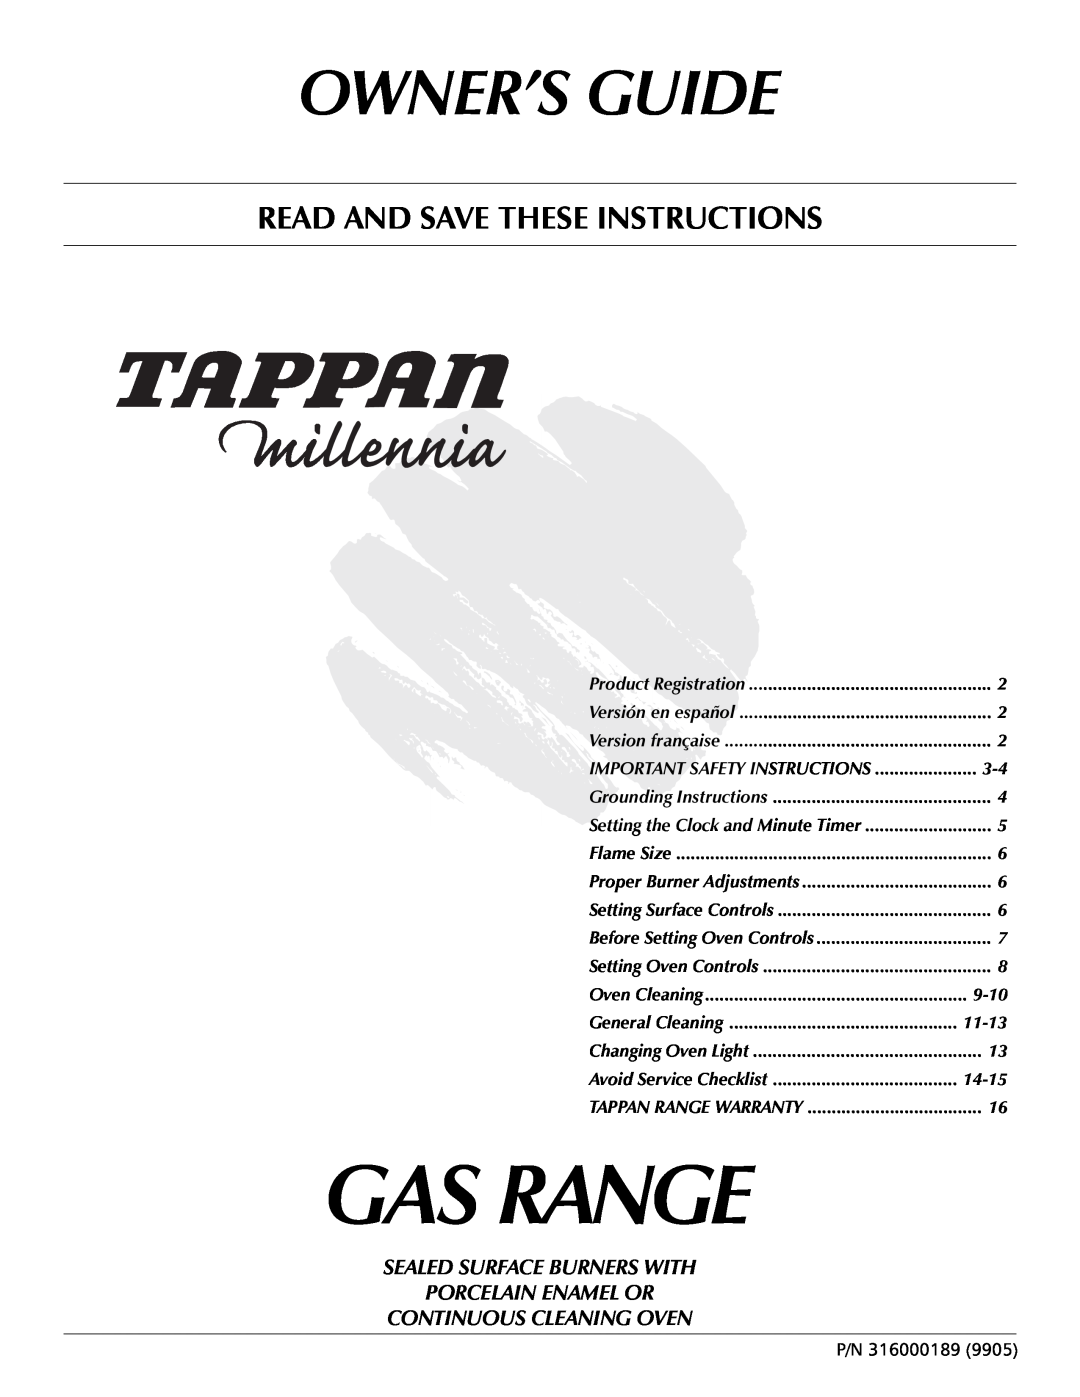 Tappan 316000189 important safety instructions Gas Range, Owner’S Guide, Read And Save These Instructions, 9-10, 11-13 